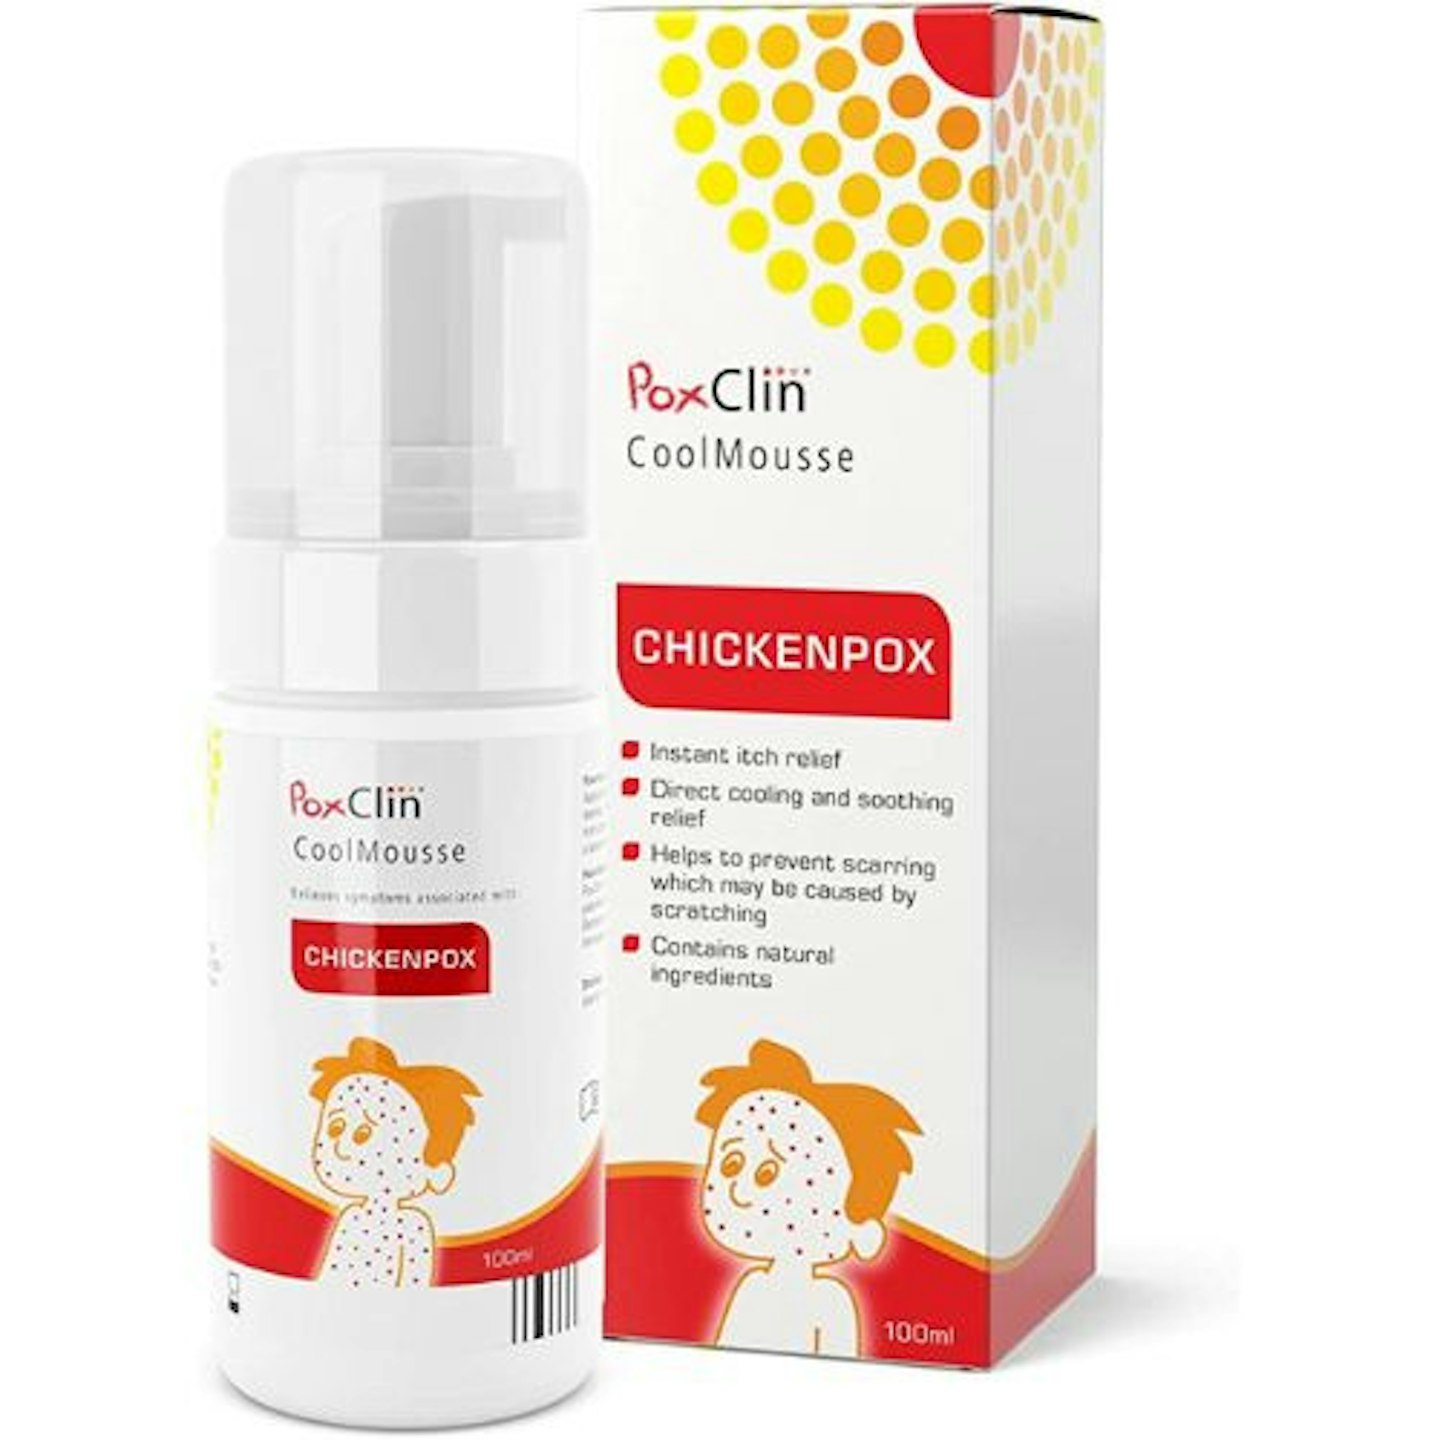 PoxClin CoolMousse Chicken Pox Treatment for Children